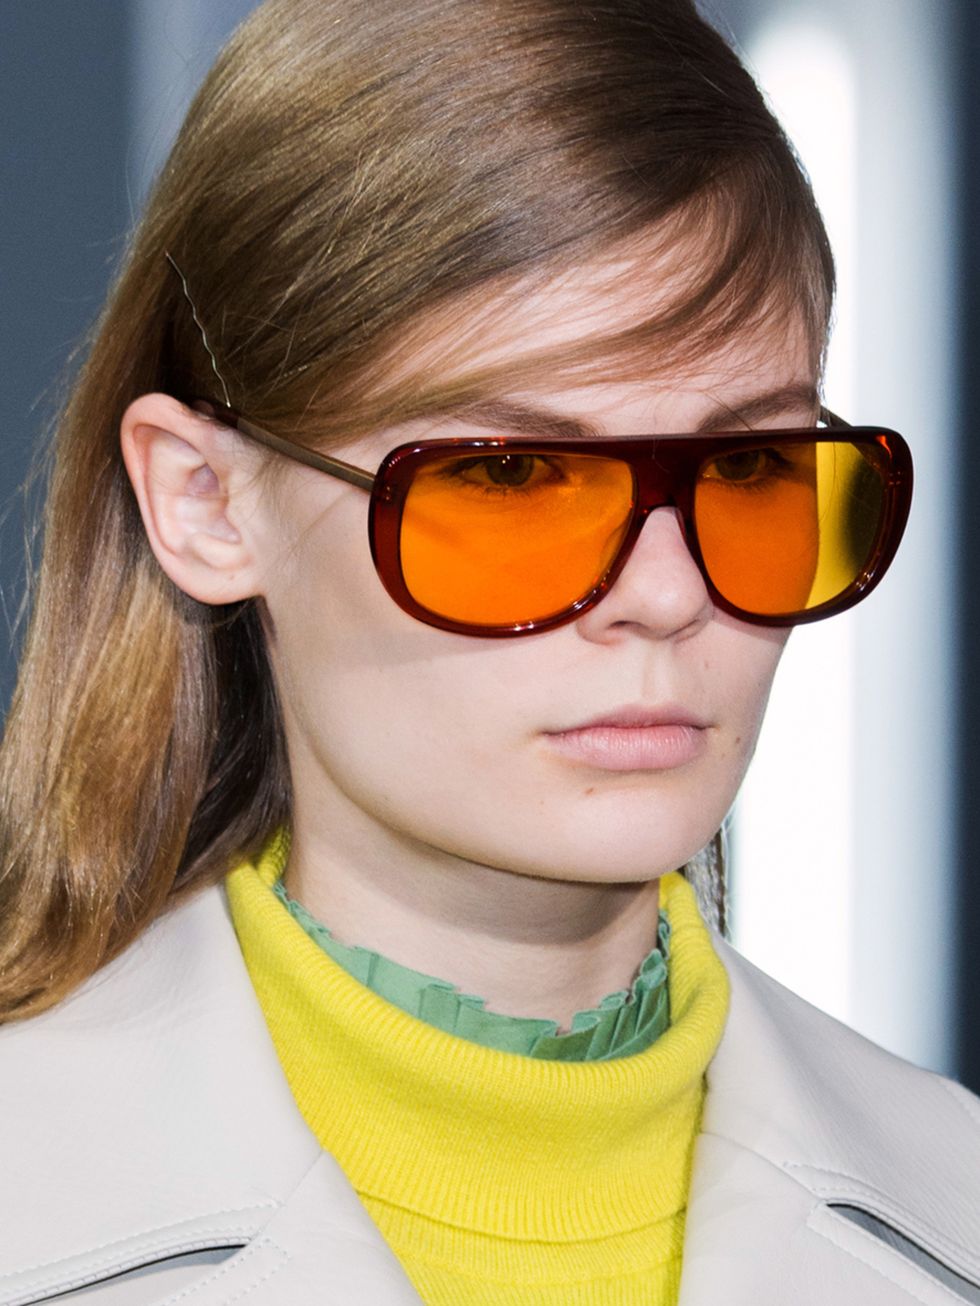 Clothing, Eyewear, Glasses, Ear, Vision care, Goggles, Hairstyle, Yellow, Collar, Chin, 